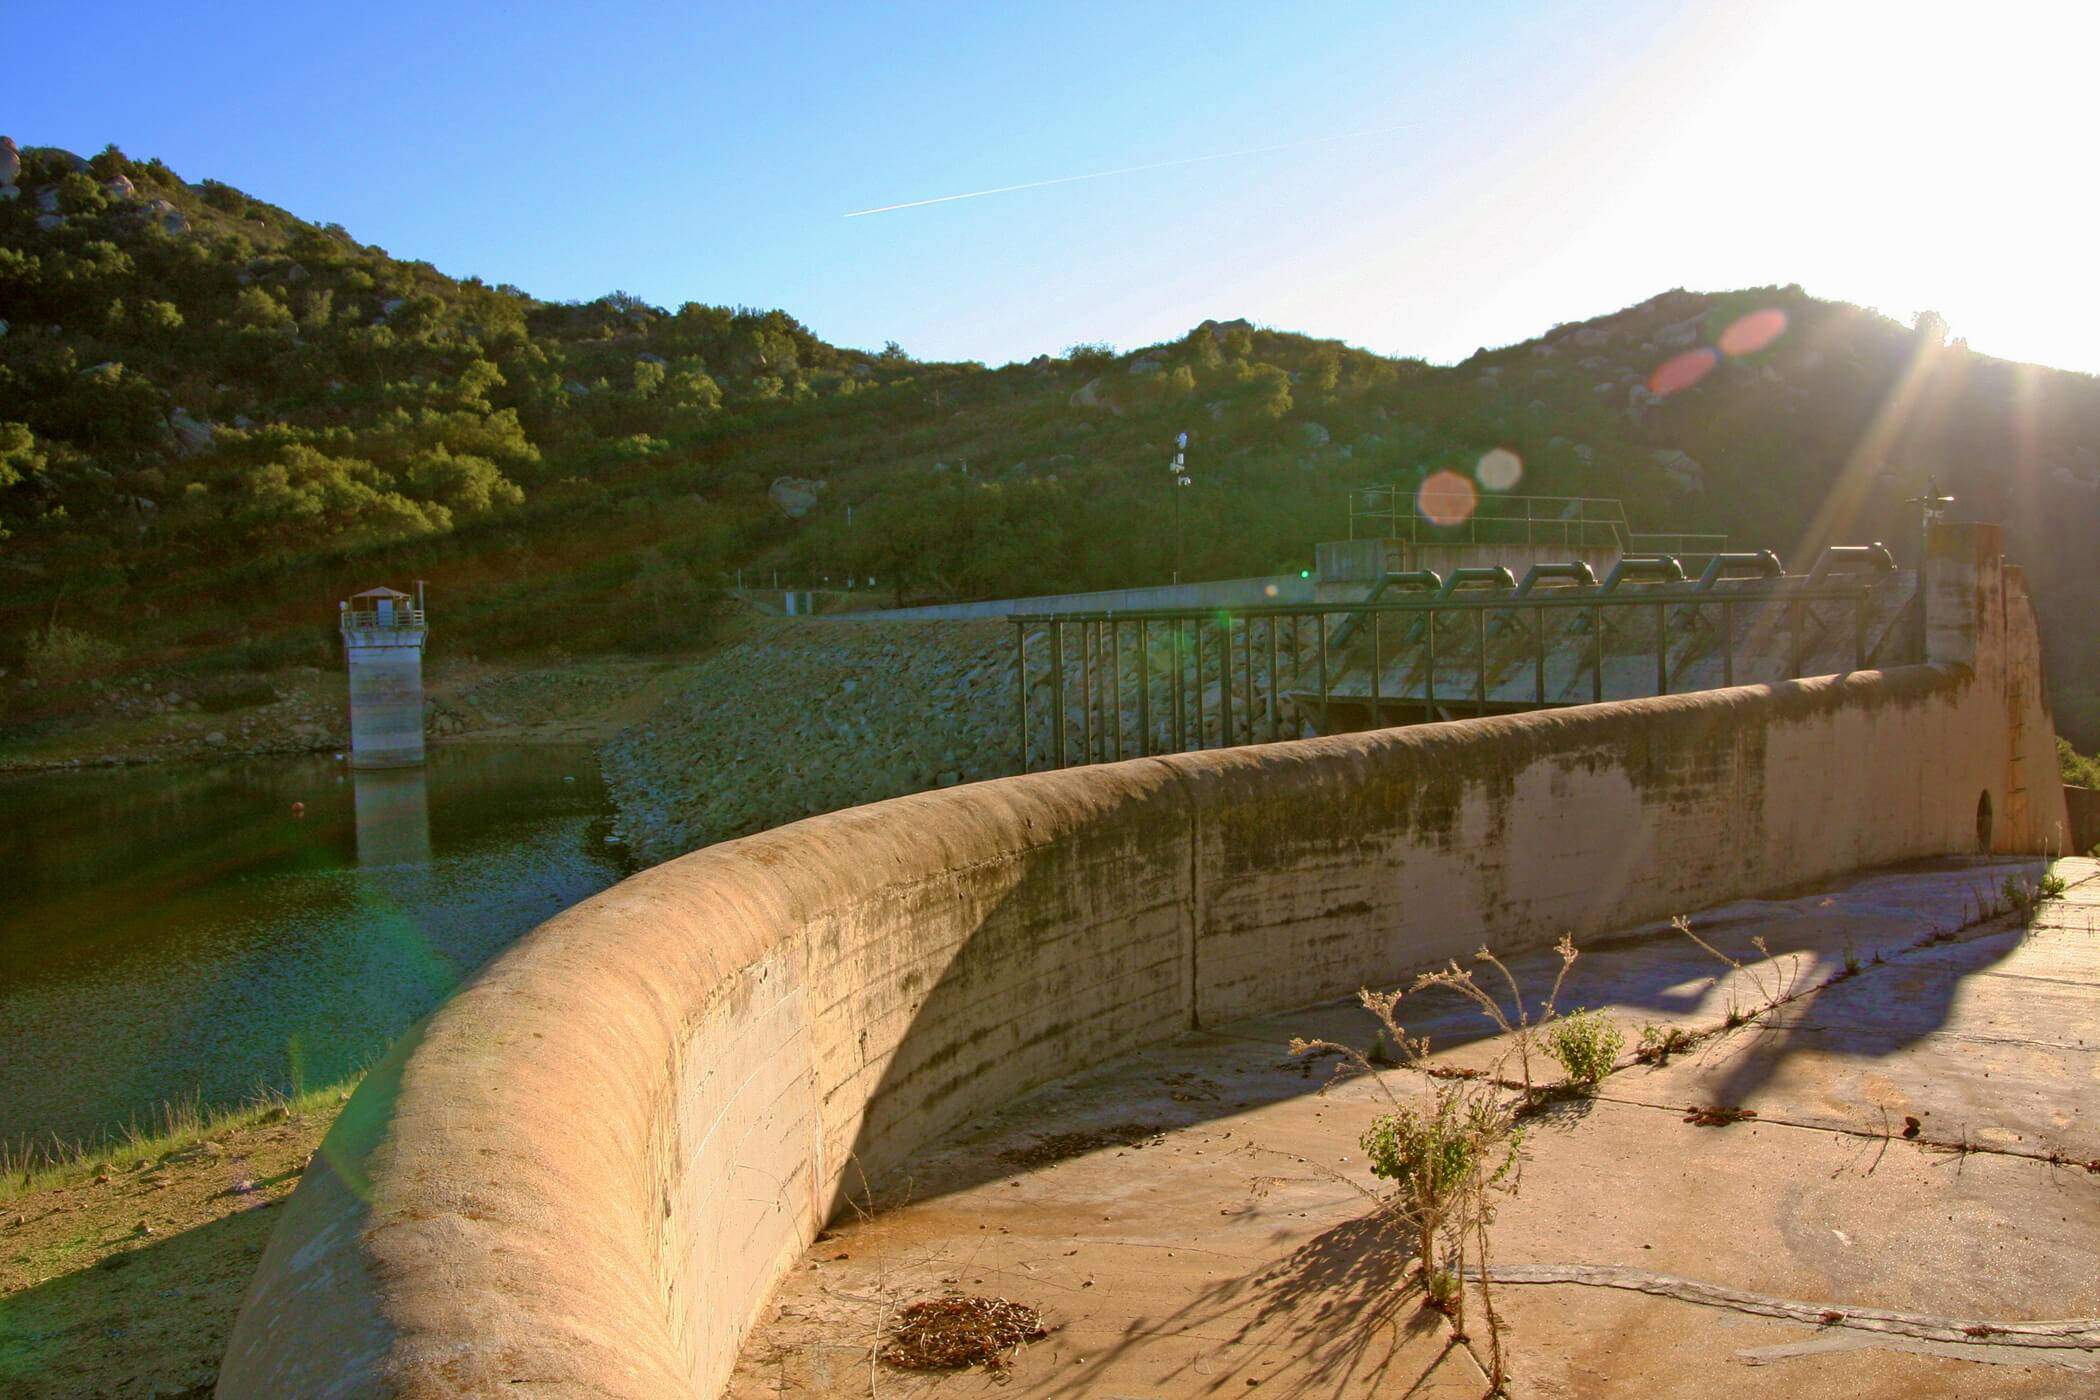 Hike to one of San Diego's historic dams in Escondido, the Lake Wohlford dam. This is an enjoyable lake to fish and hike around.